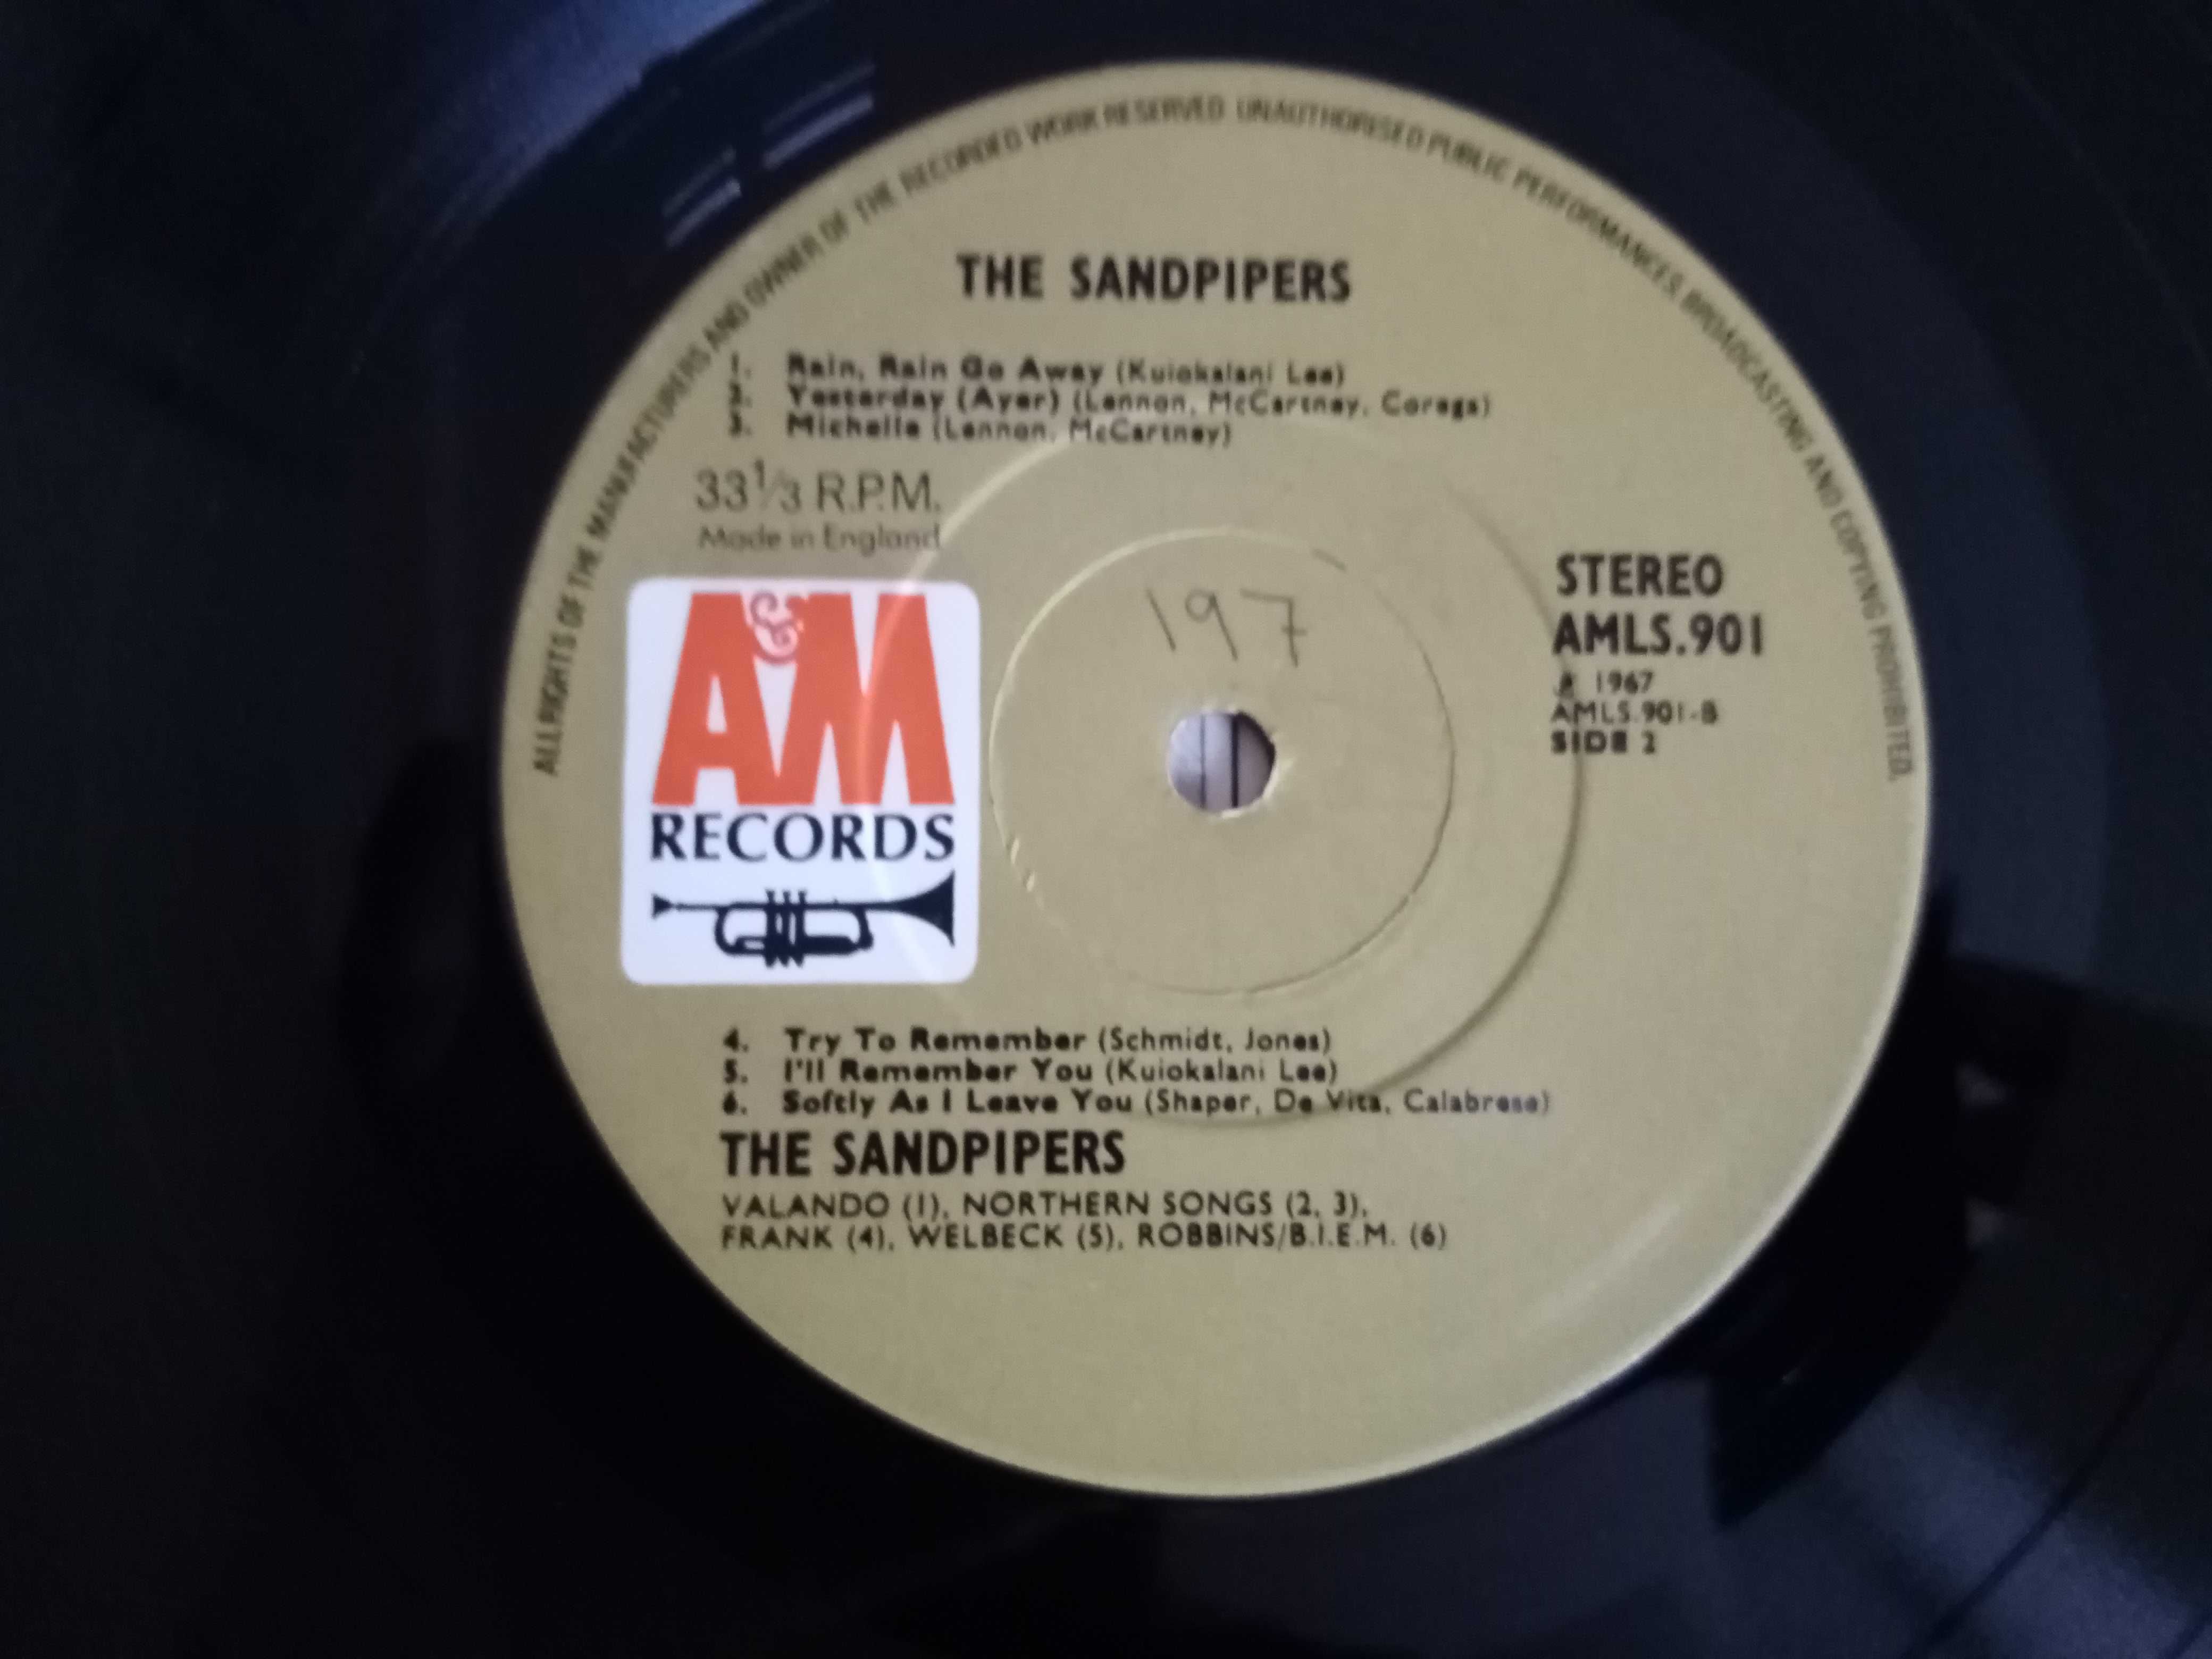 The Sandpipers  The Sandpipers  LP  WINYL  UK